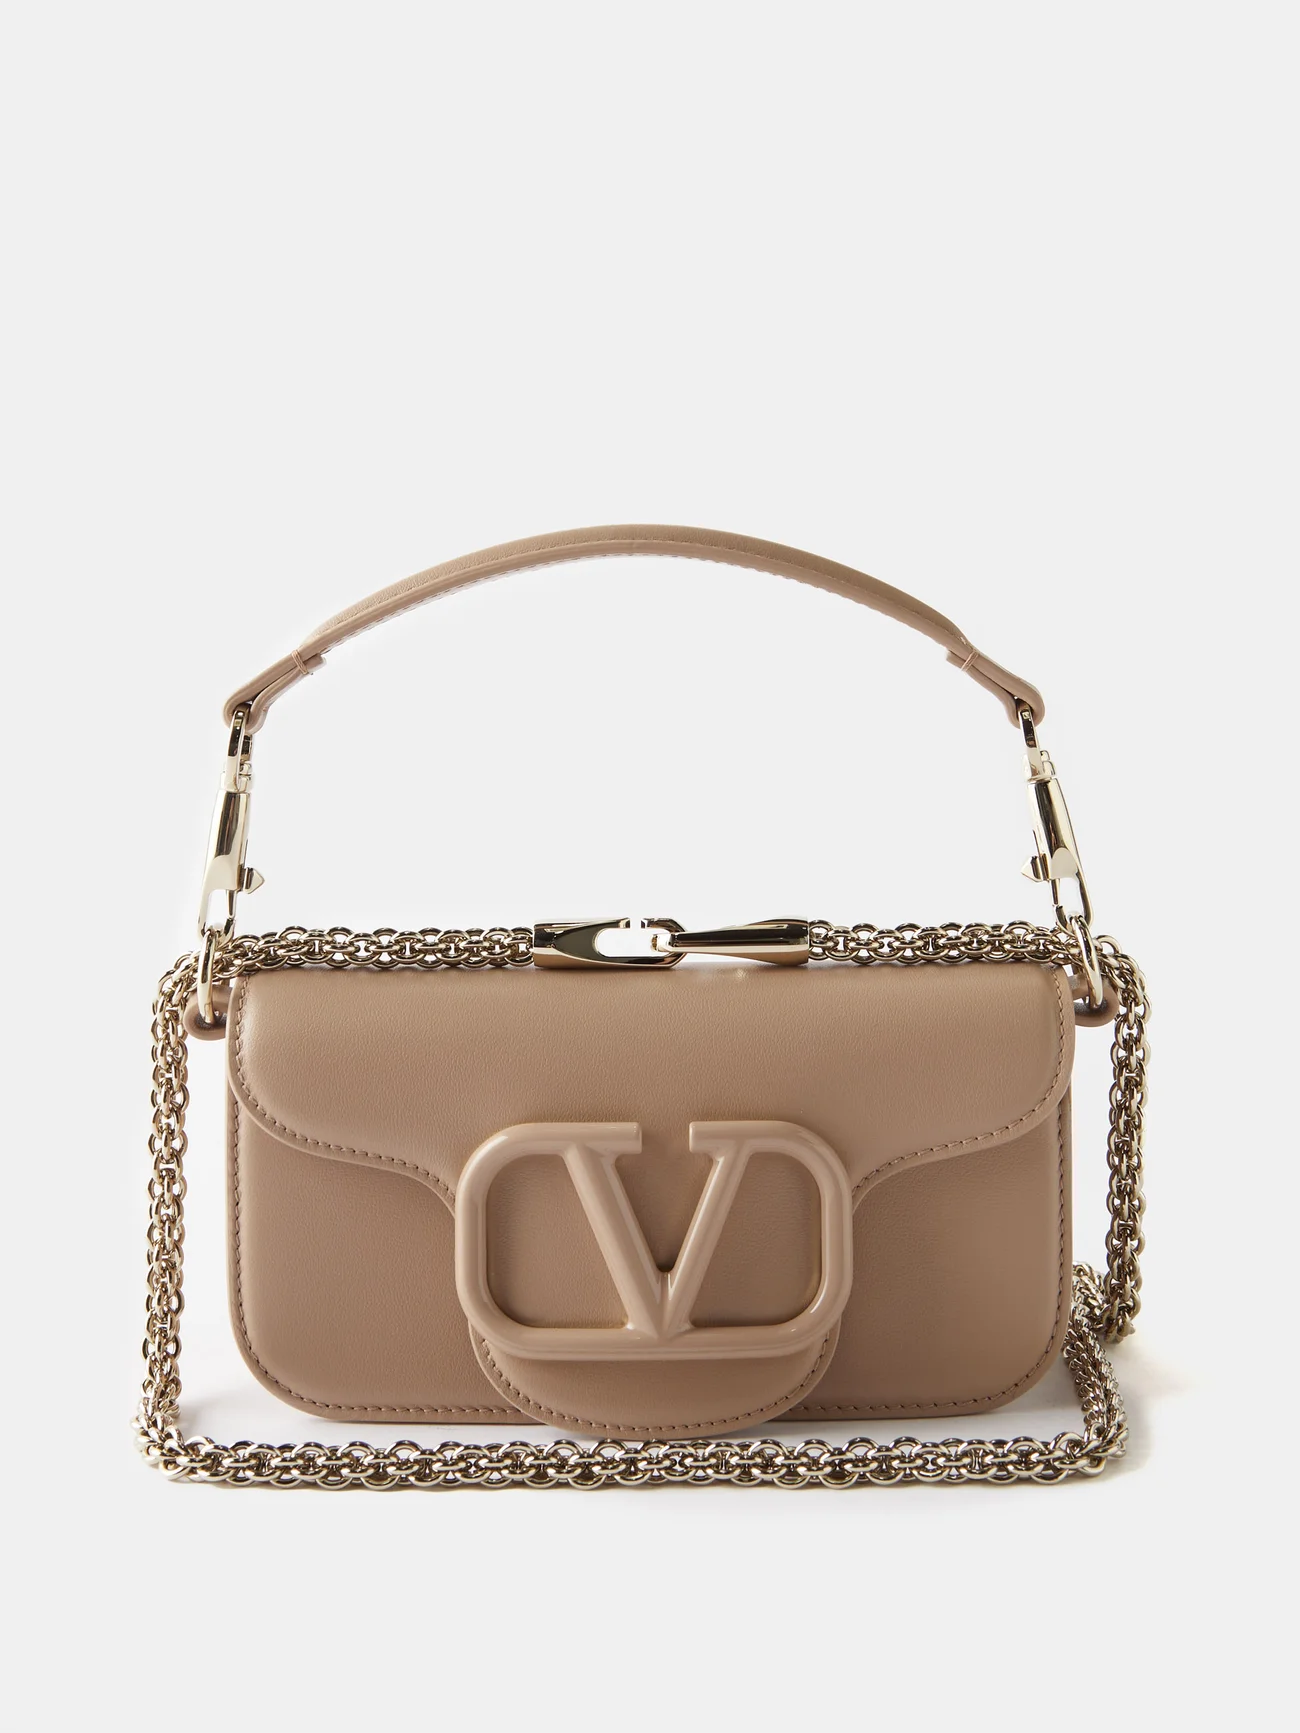 The New Iterations Of Valentino Loco Bag Are Season's Evening